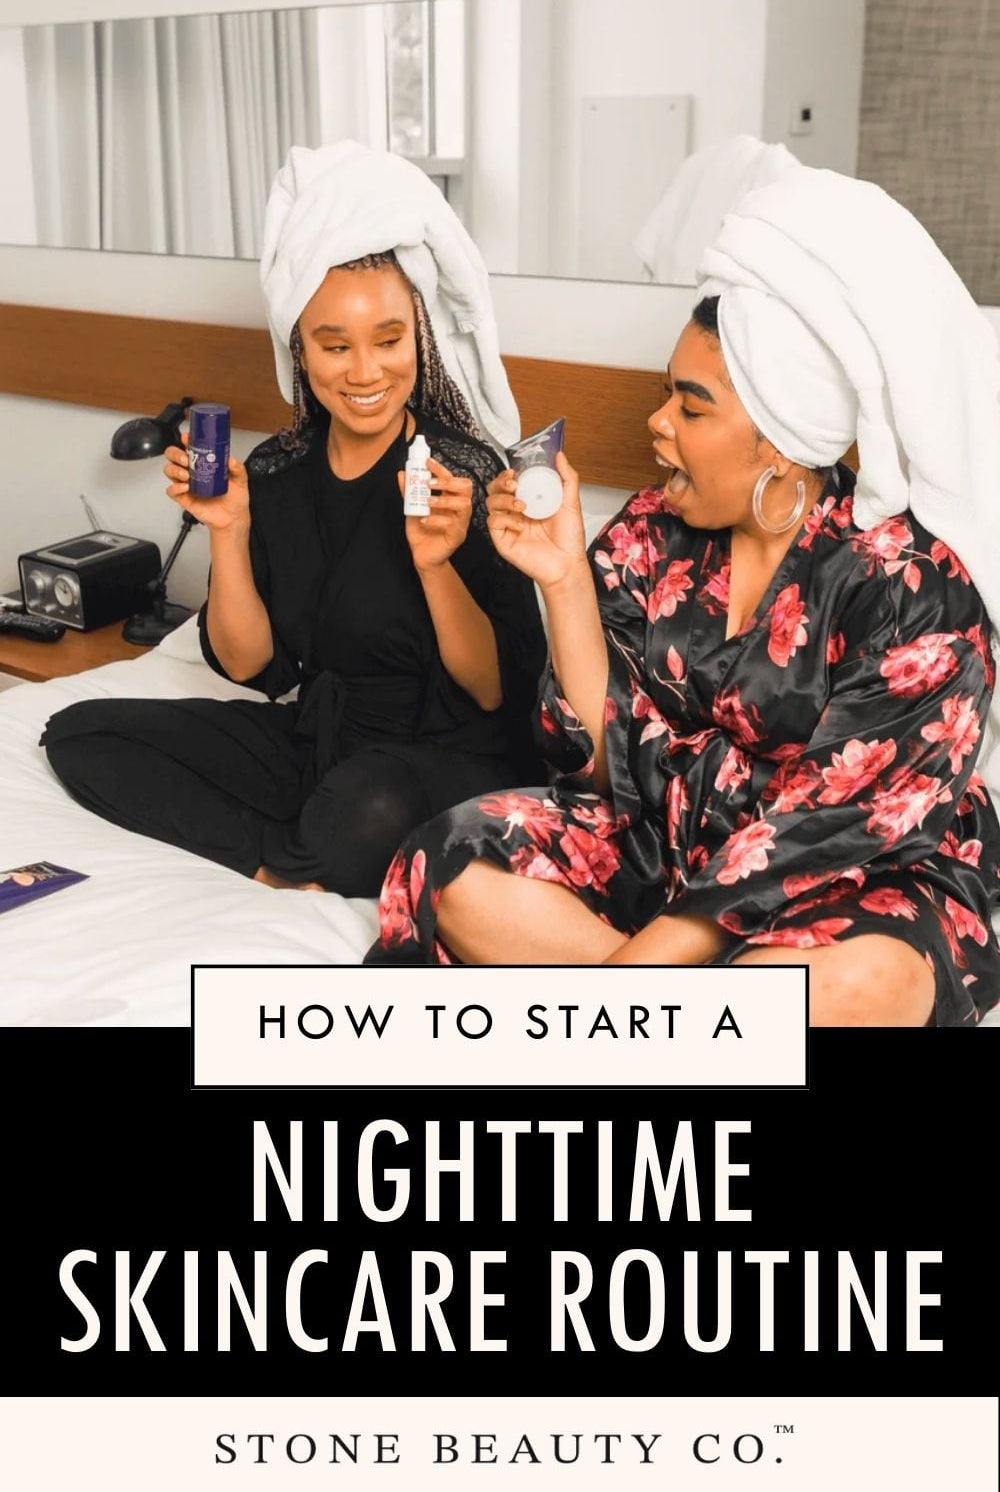 How to Start a Nighttime Skincare Routine